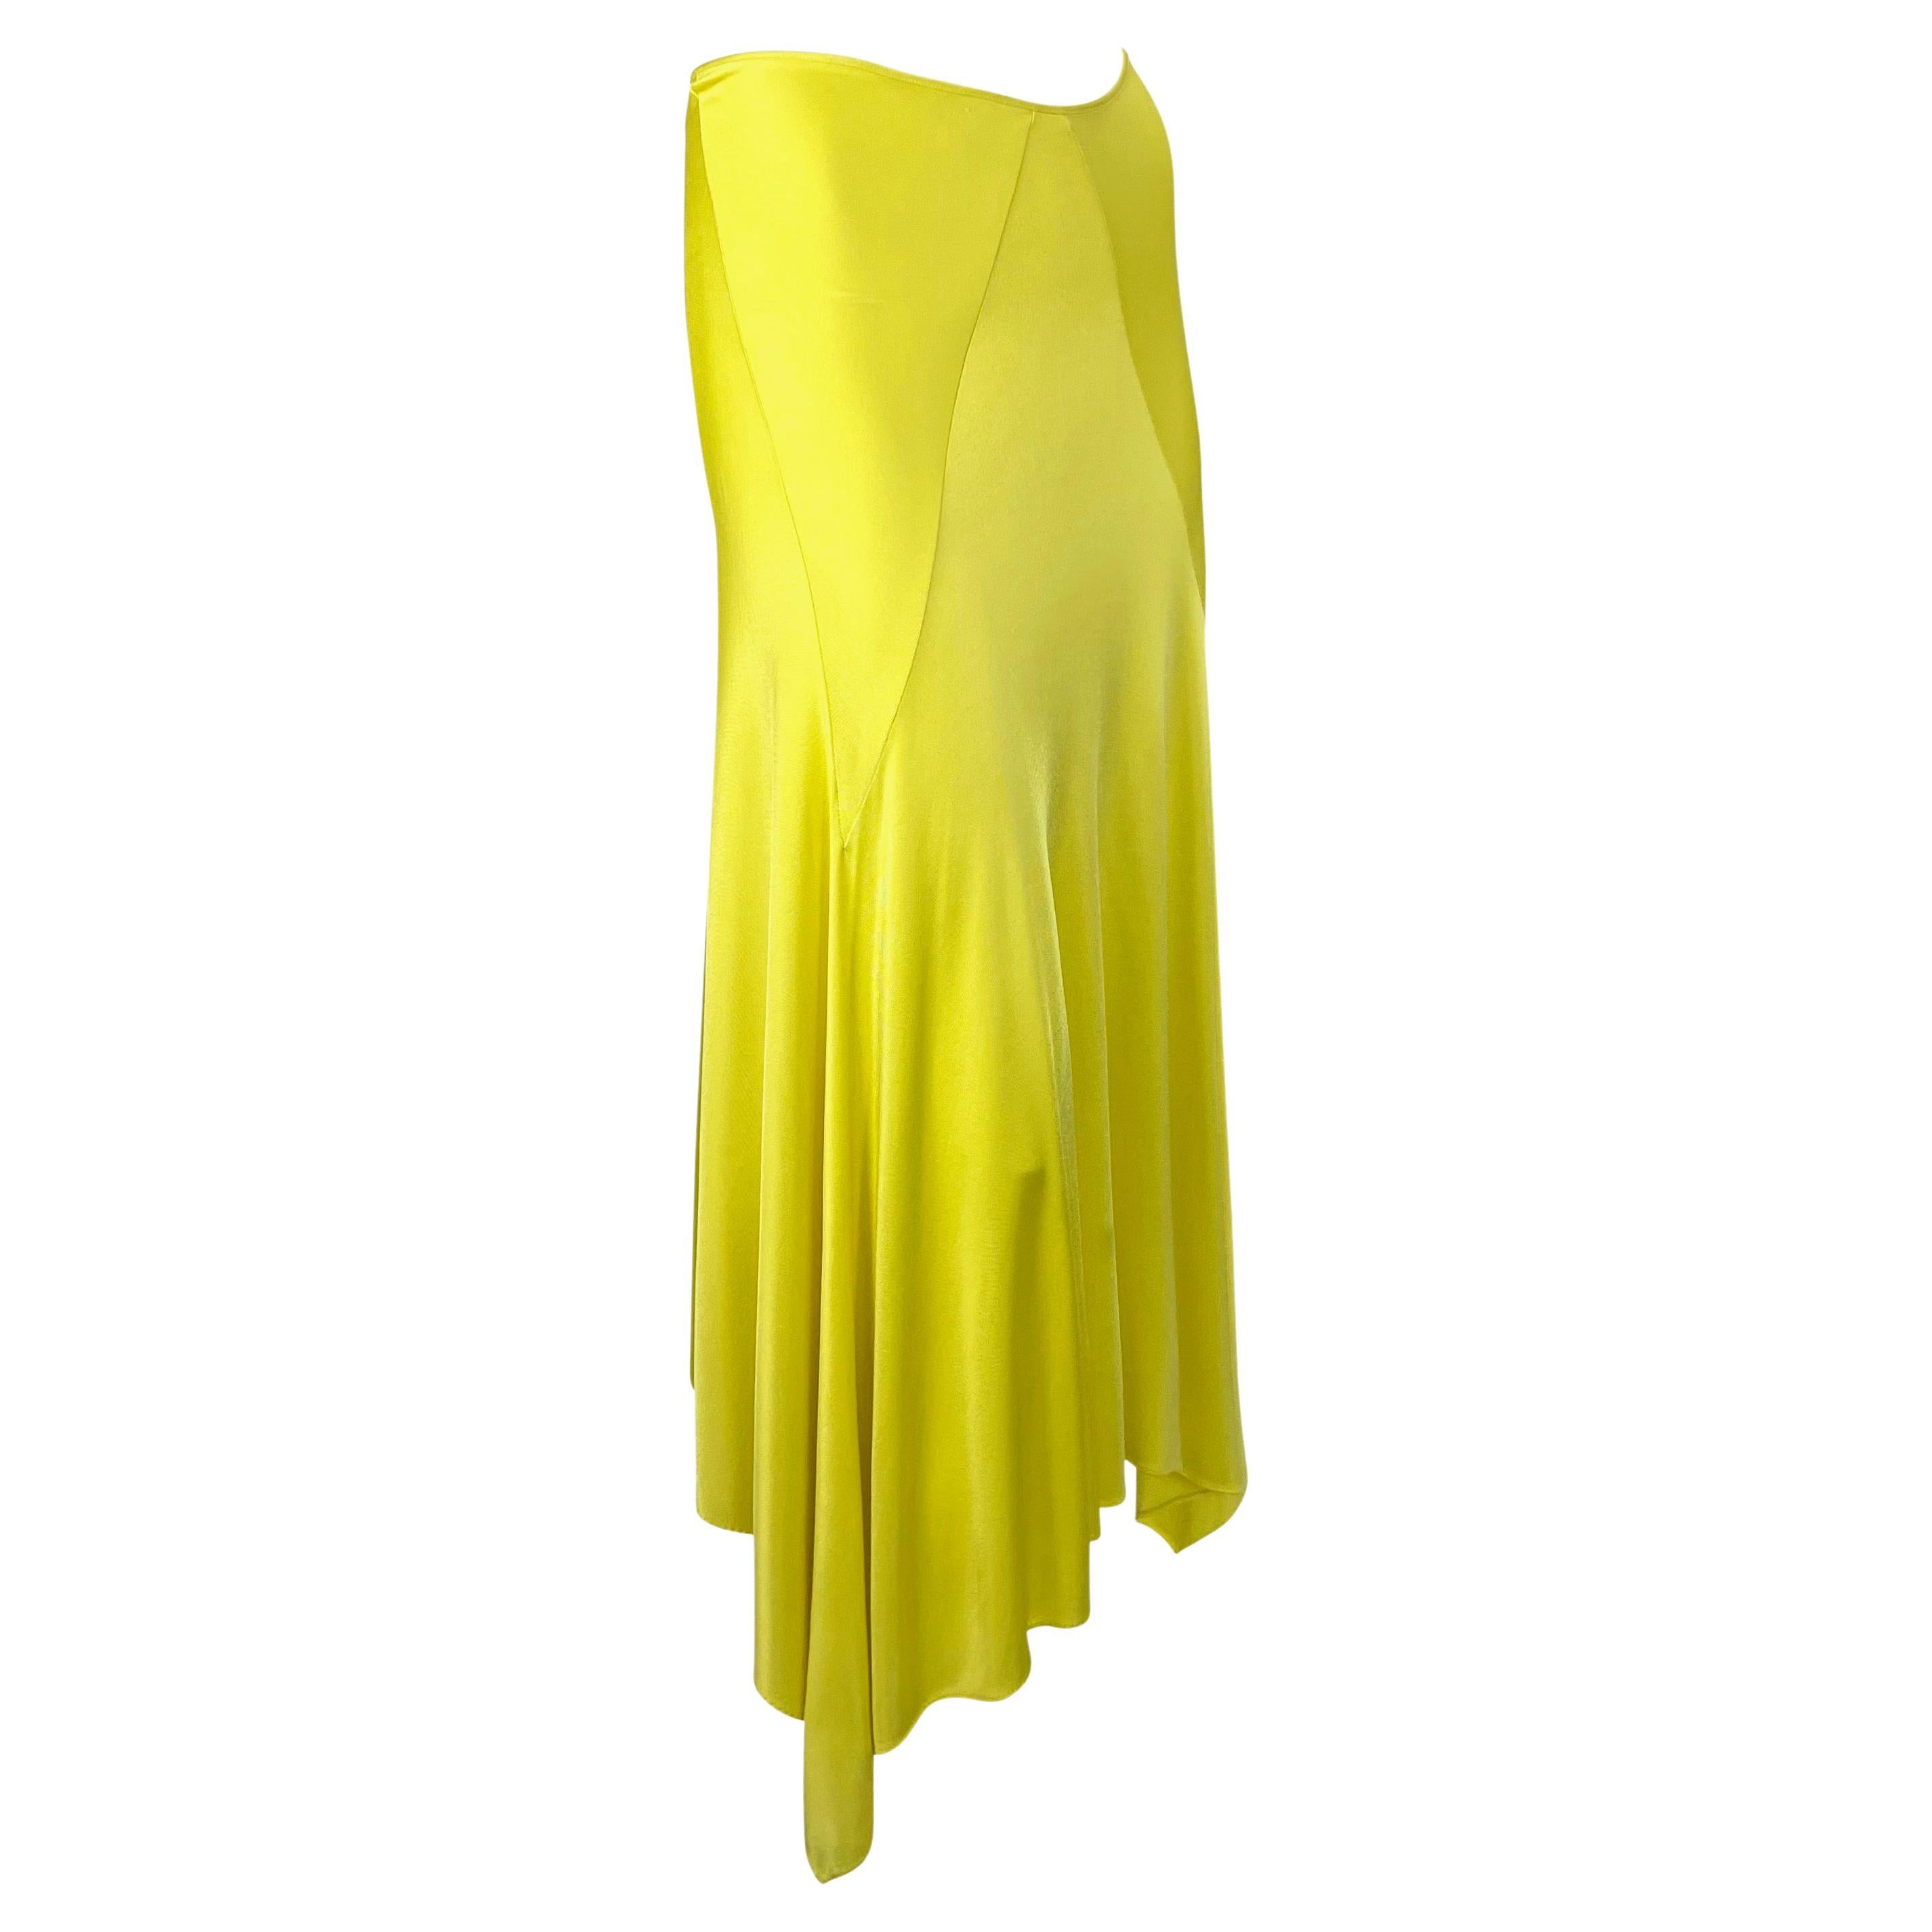 S/S 2004 Yves Saint Laurent by Tom Ford Canary Yellow Stretch Maxi Skirt For Sale 1